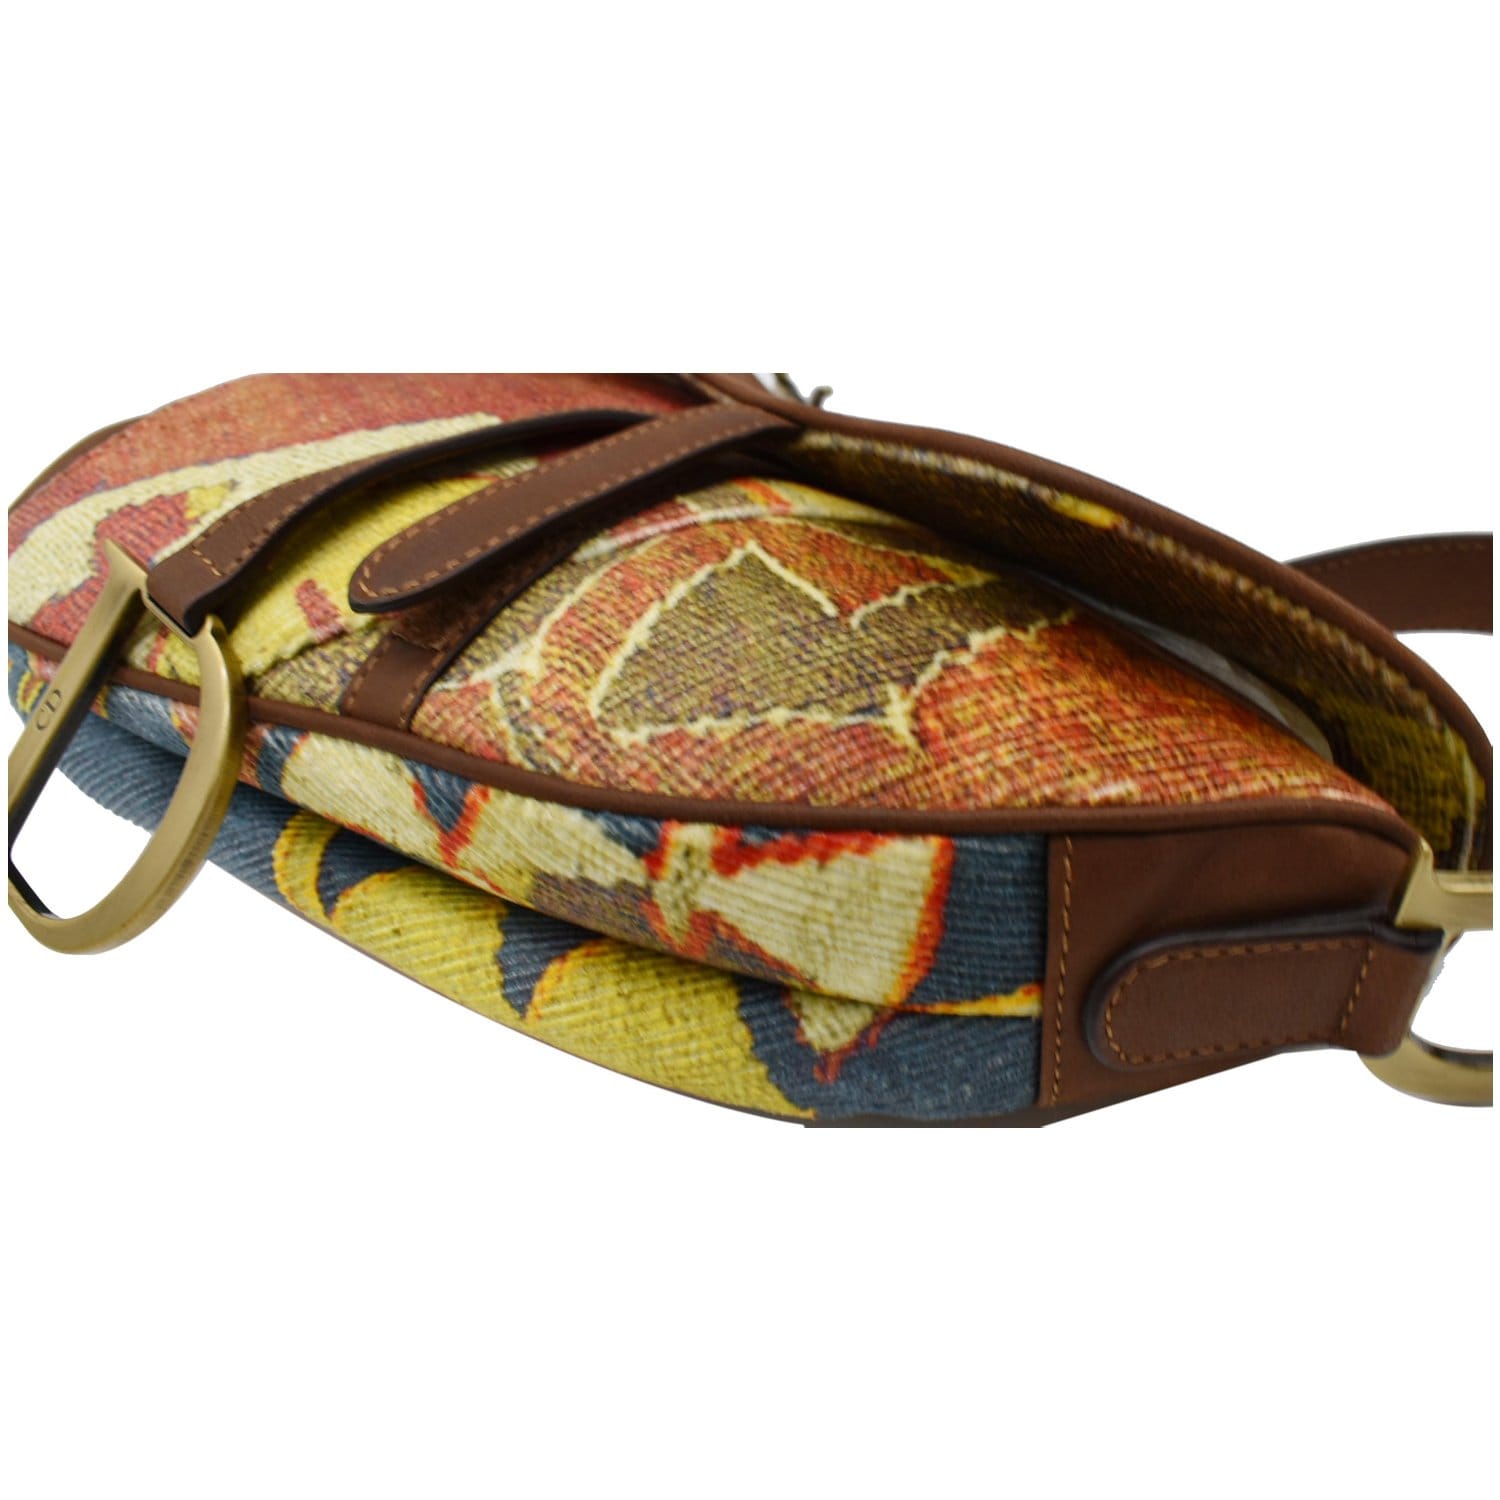 Lv scarf brown  The Style Tapestry